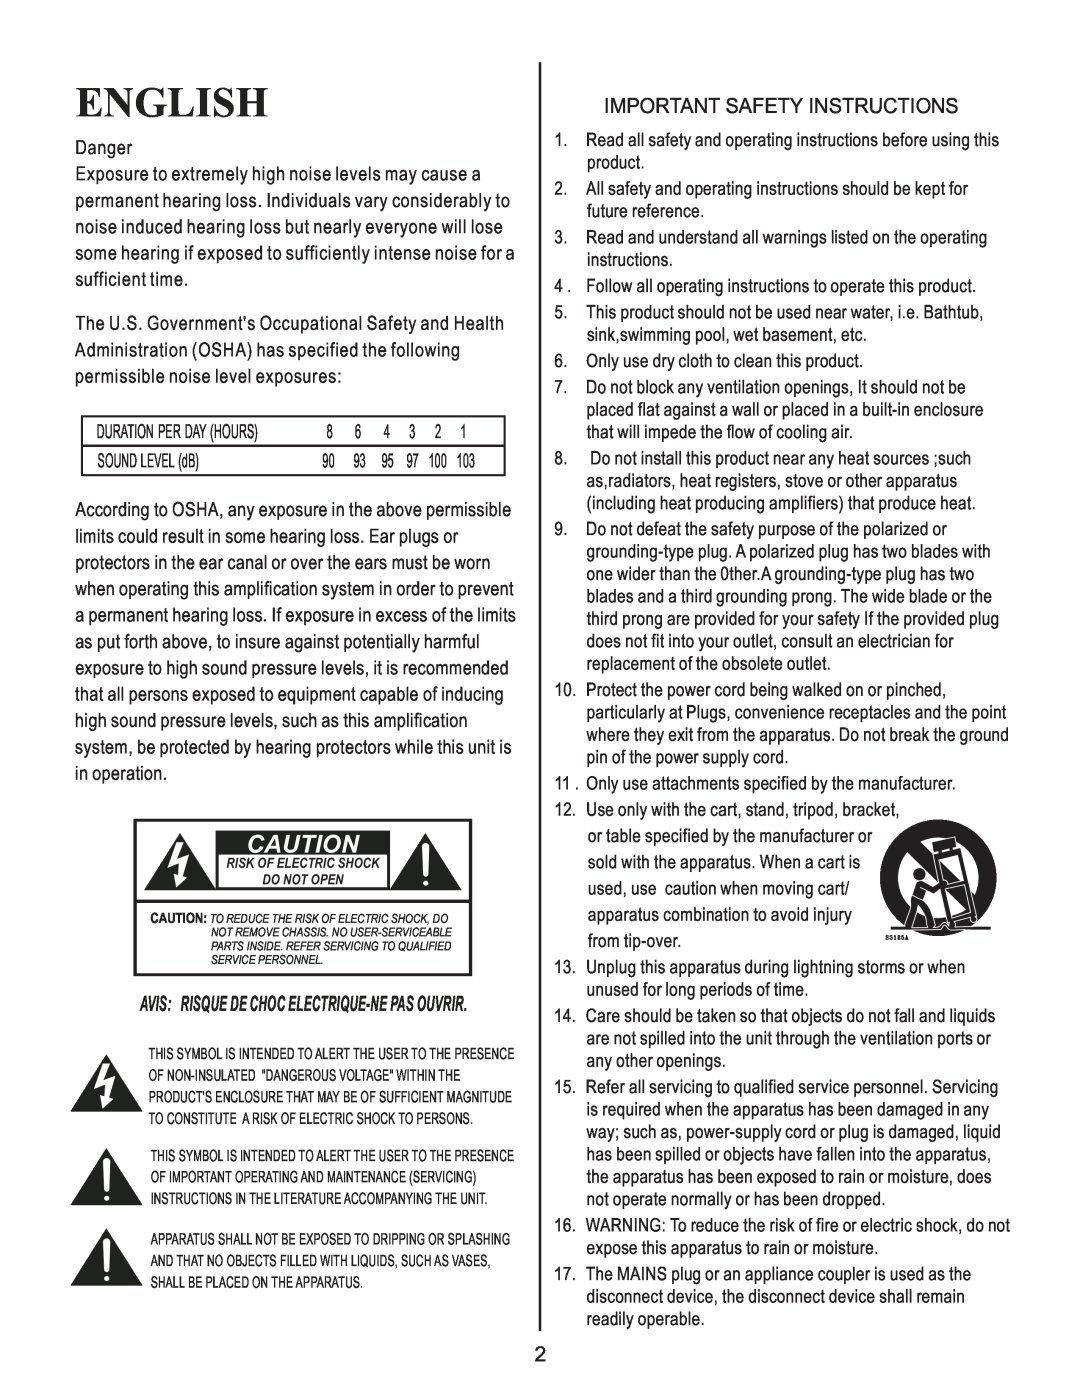 Kustom DE200HD owner manual English, Important Safety Instructions 